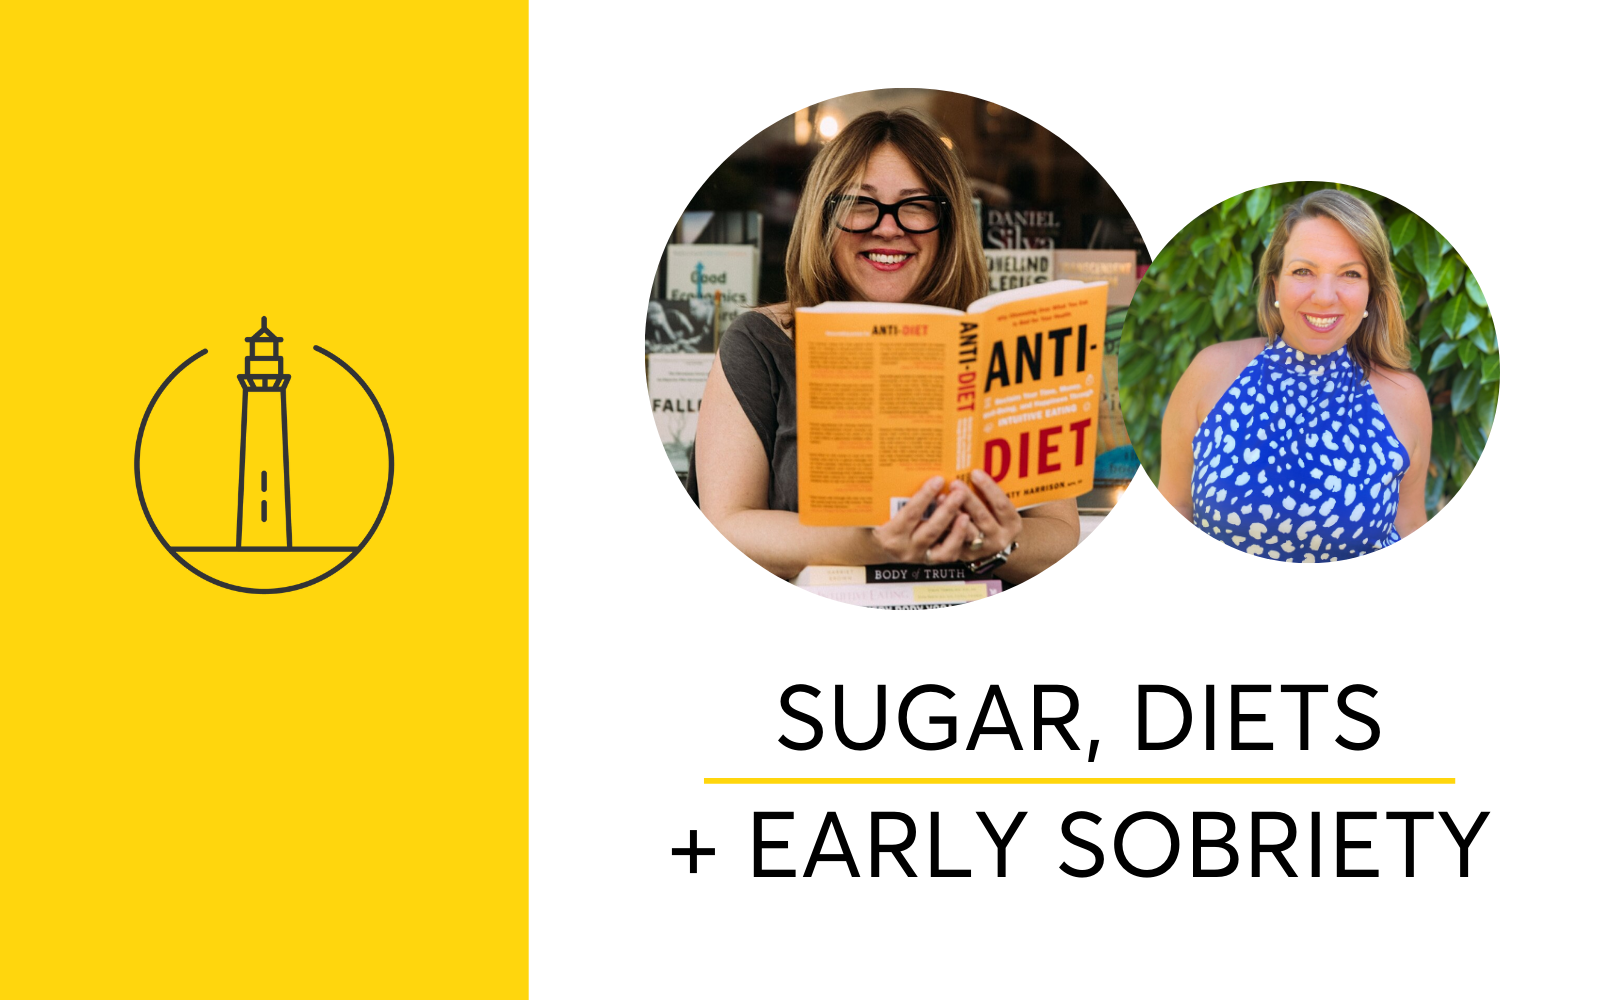 Sugar, Diets and Early Sobriety